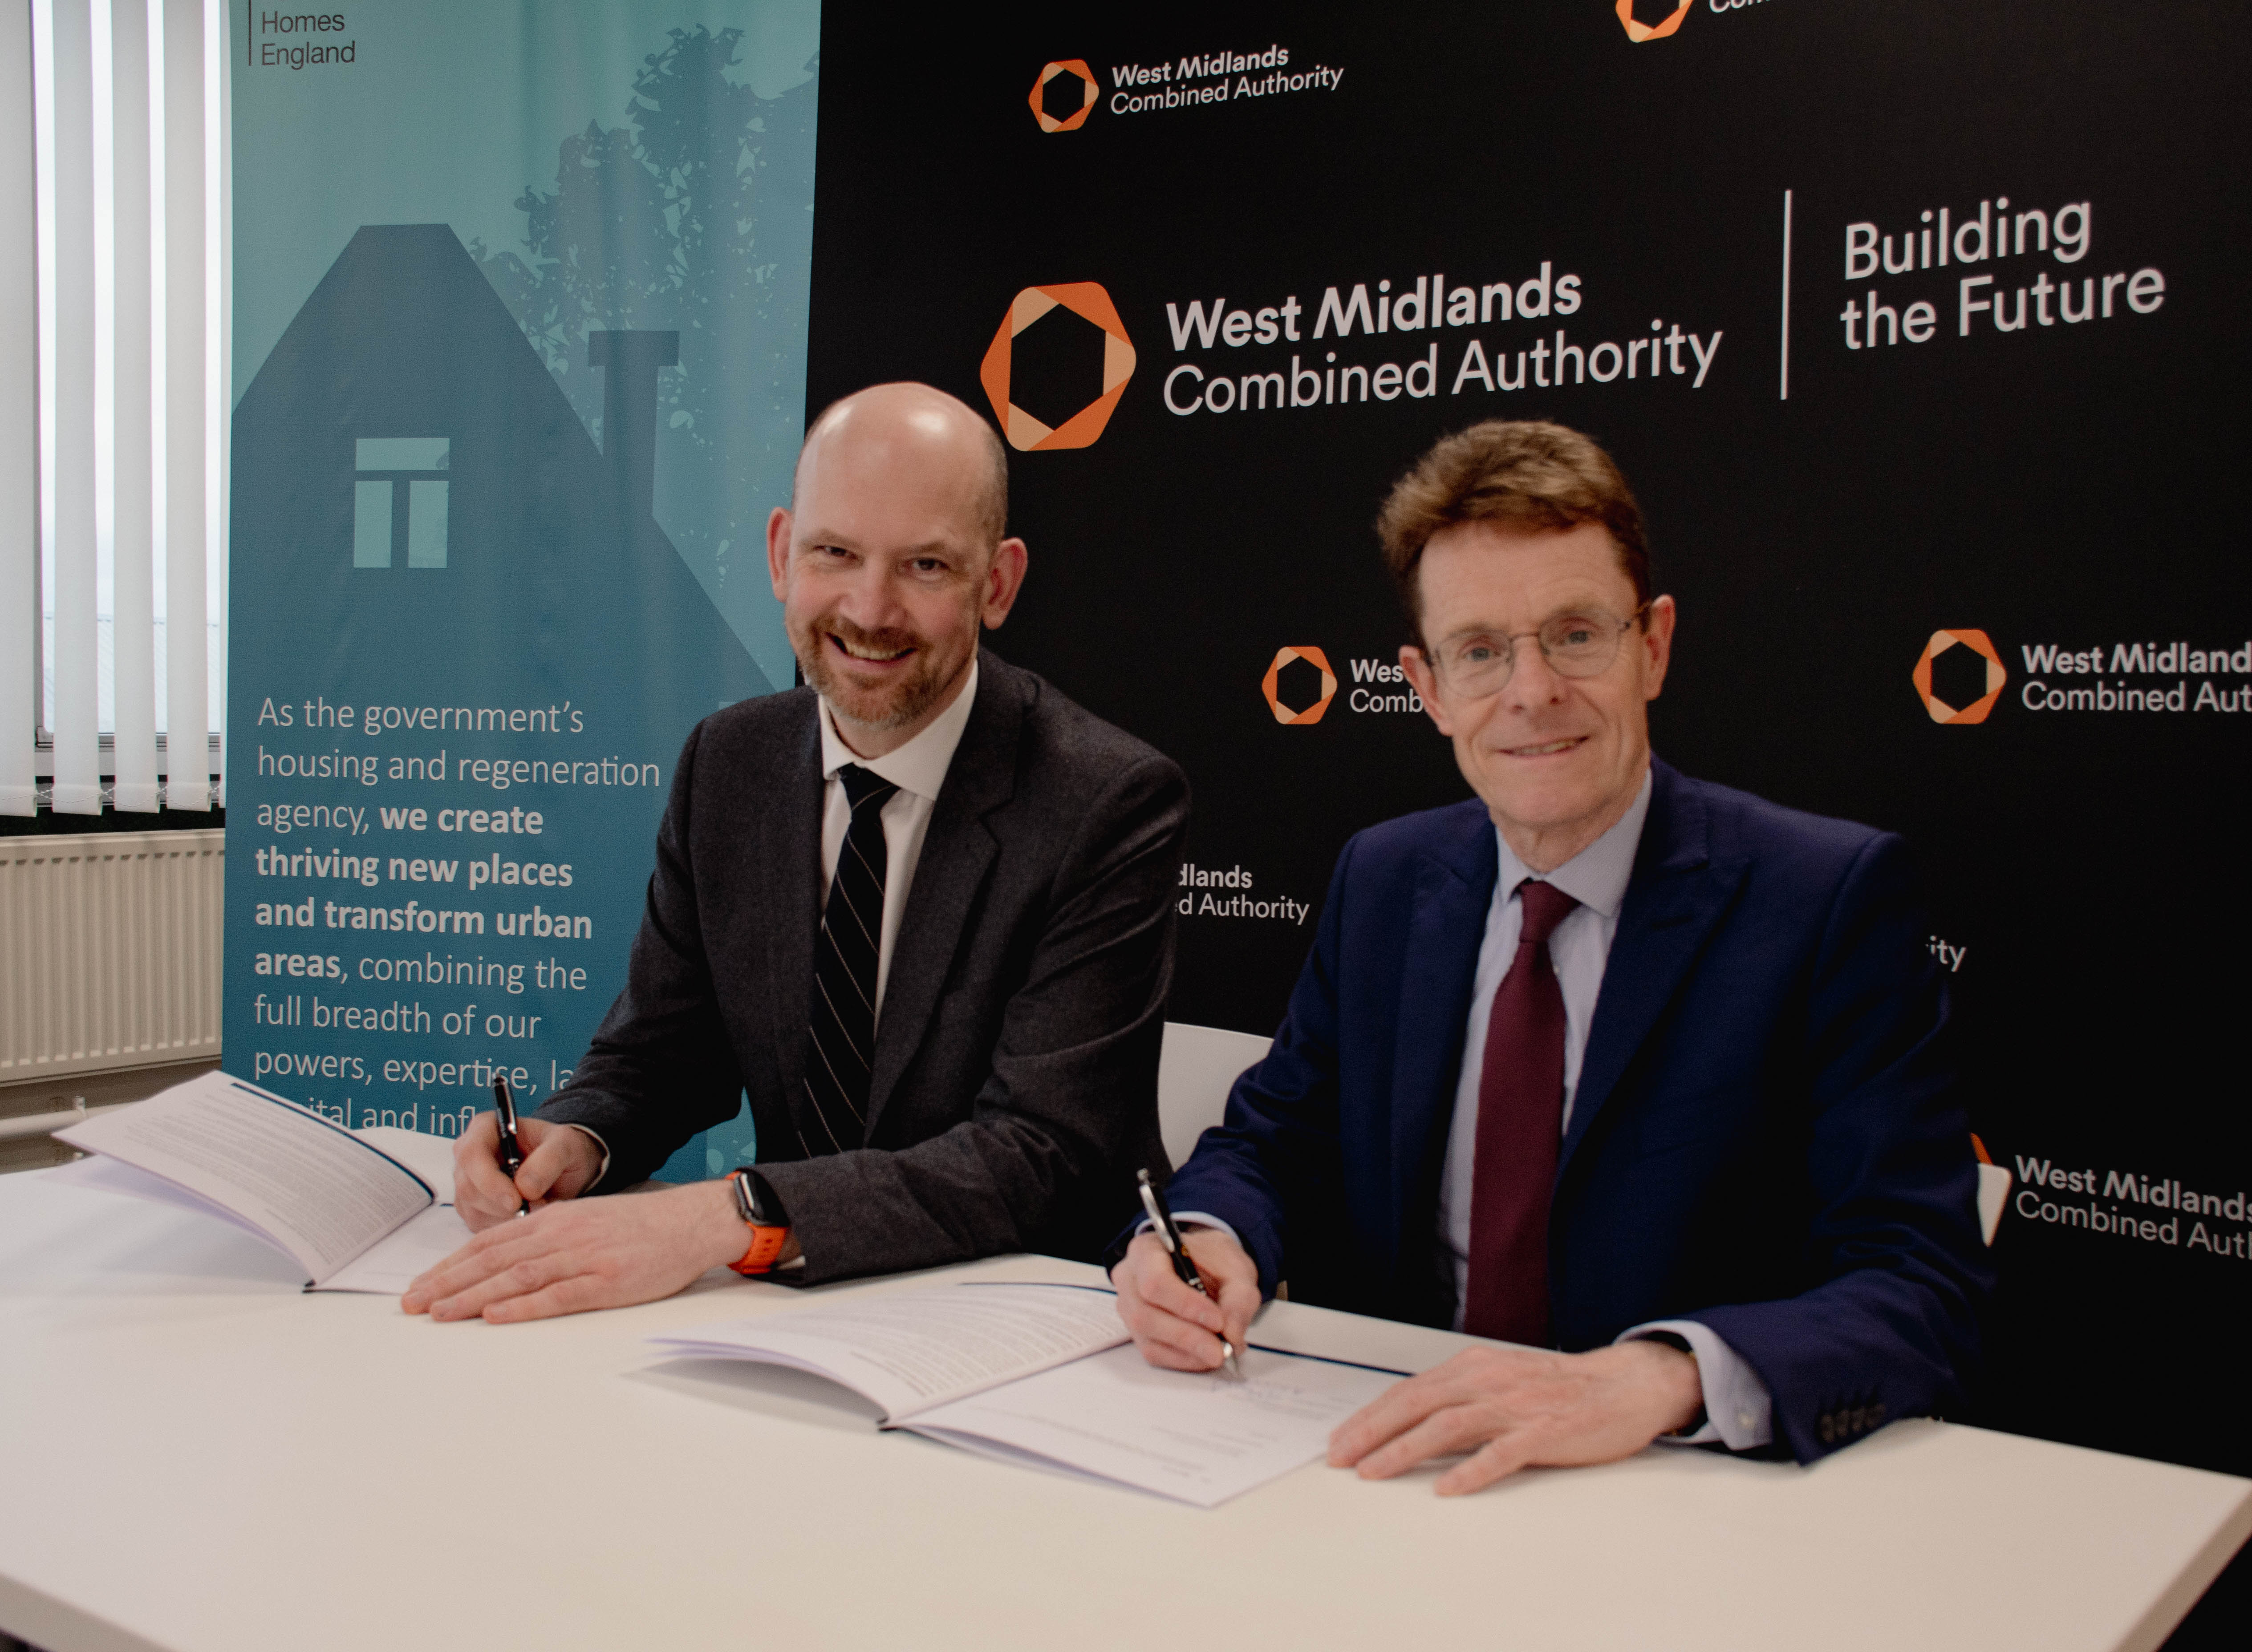 Peter Denton, chief executive of Homes England, left, with Andy Street, Mayor of the West Midlands and Chair of the WMCA.